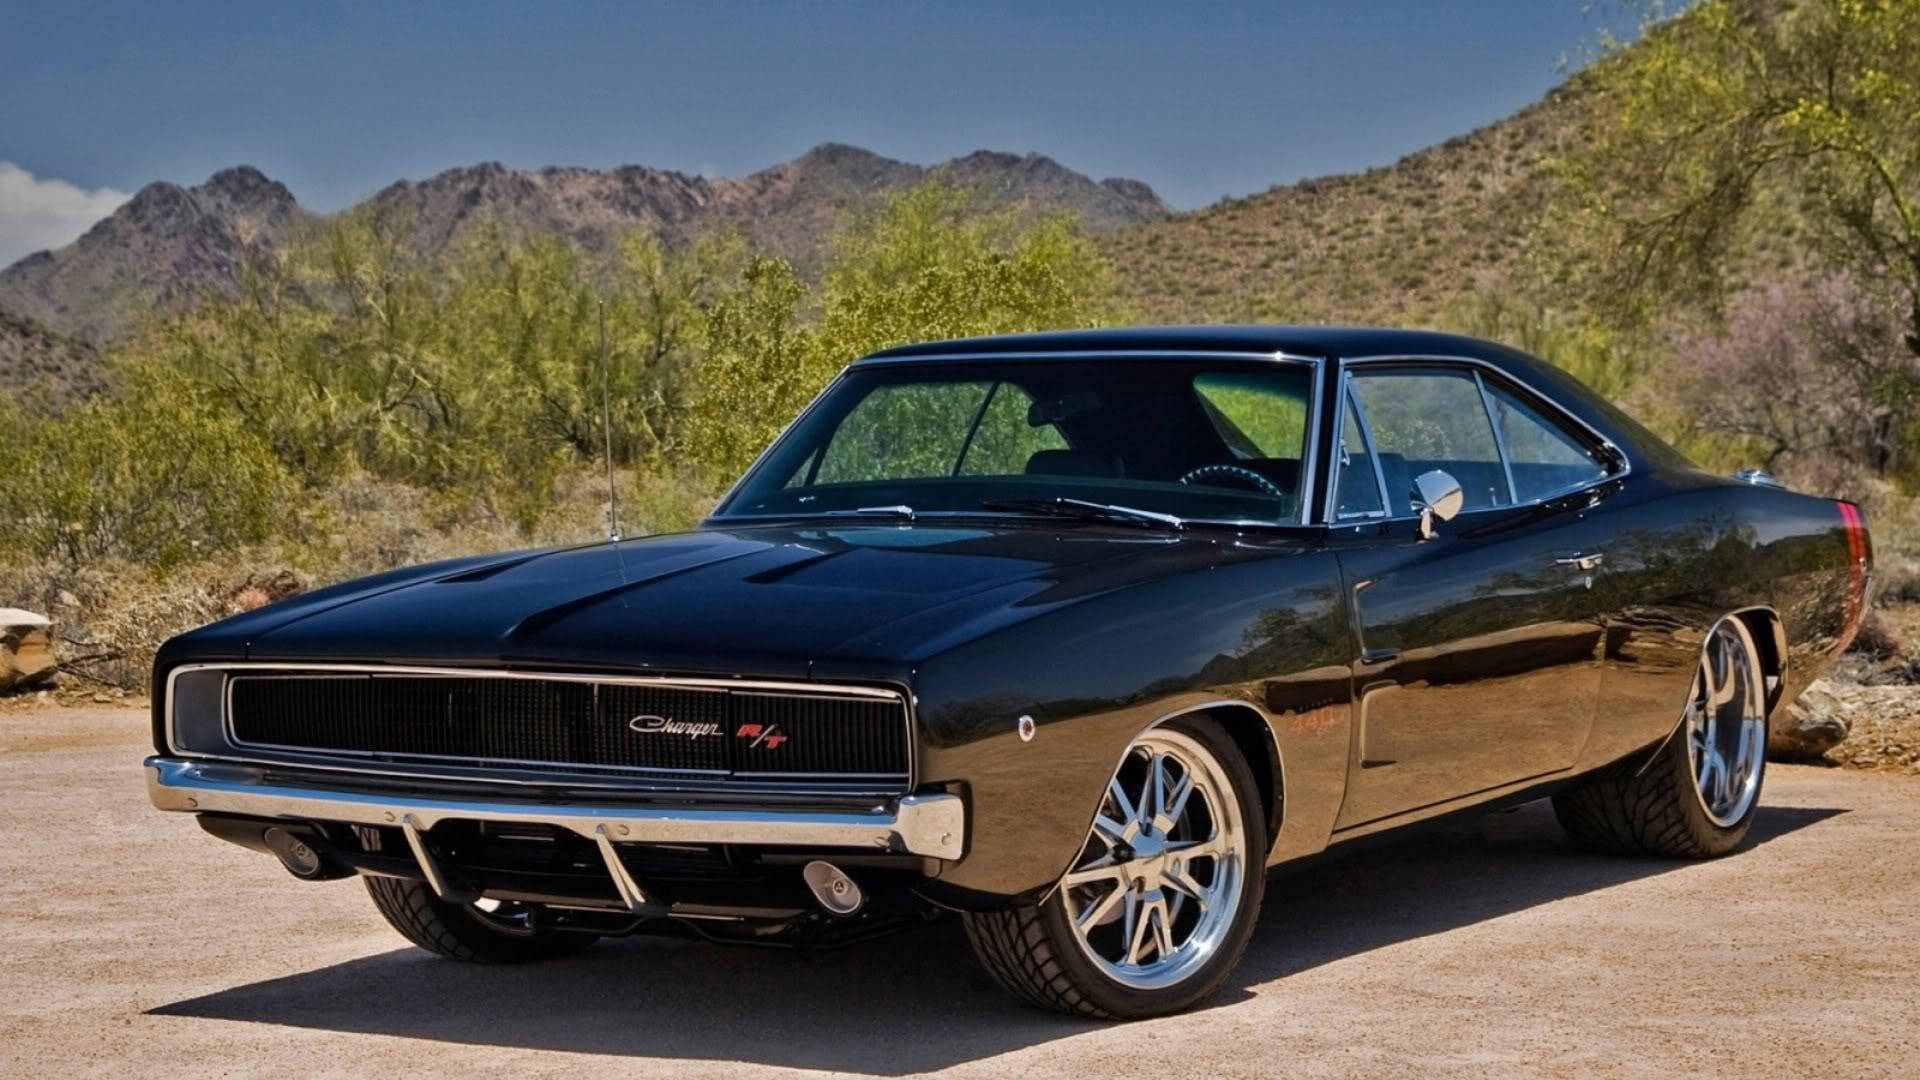 Classic 1969 Dodge Charger Wallpaper